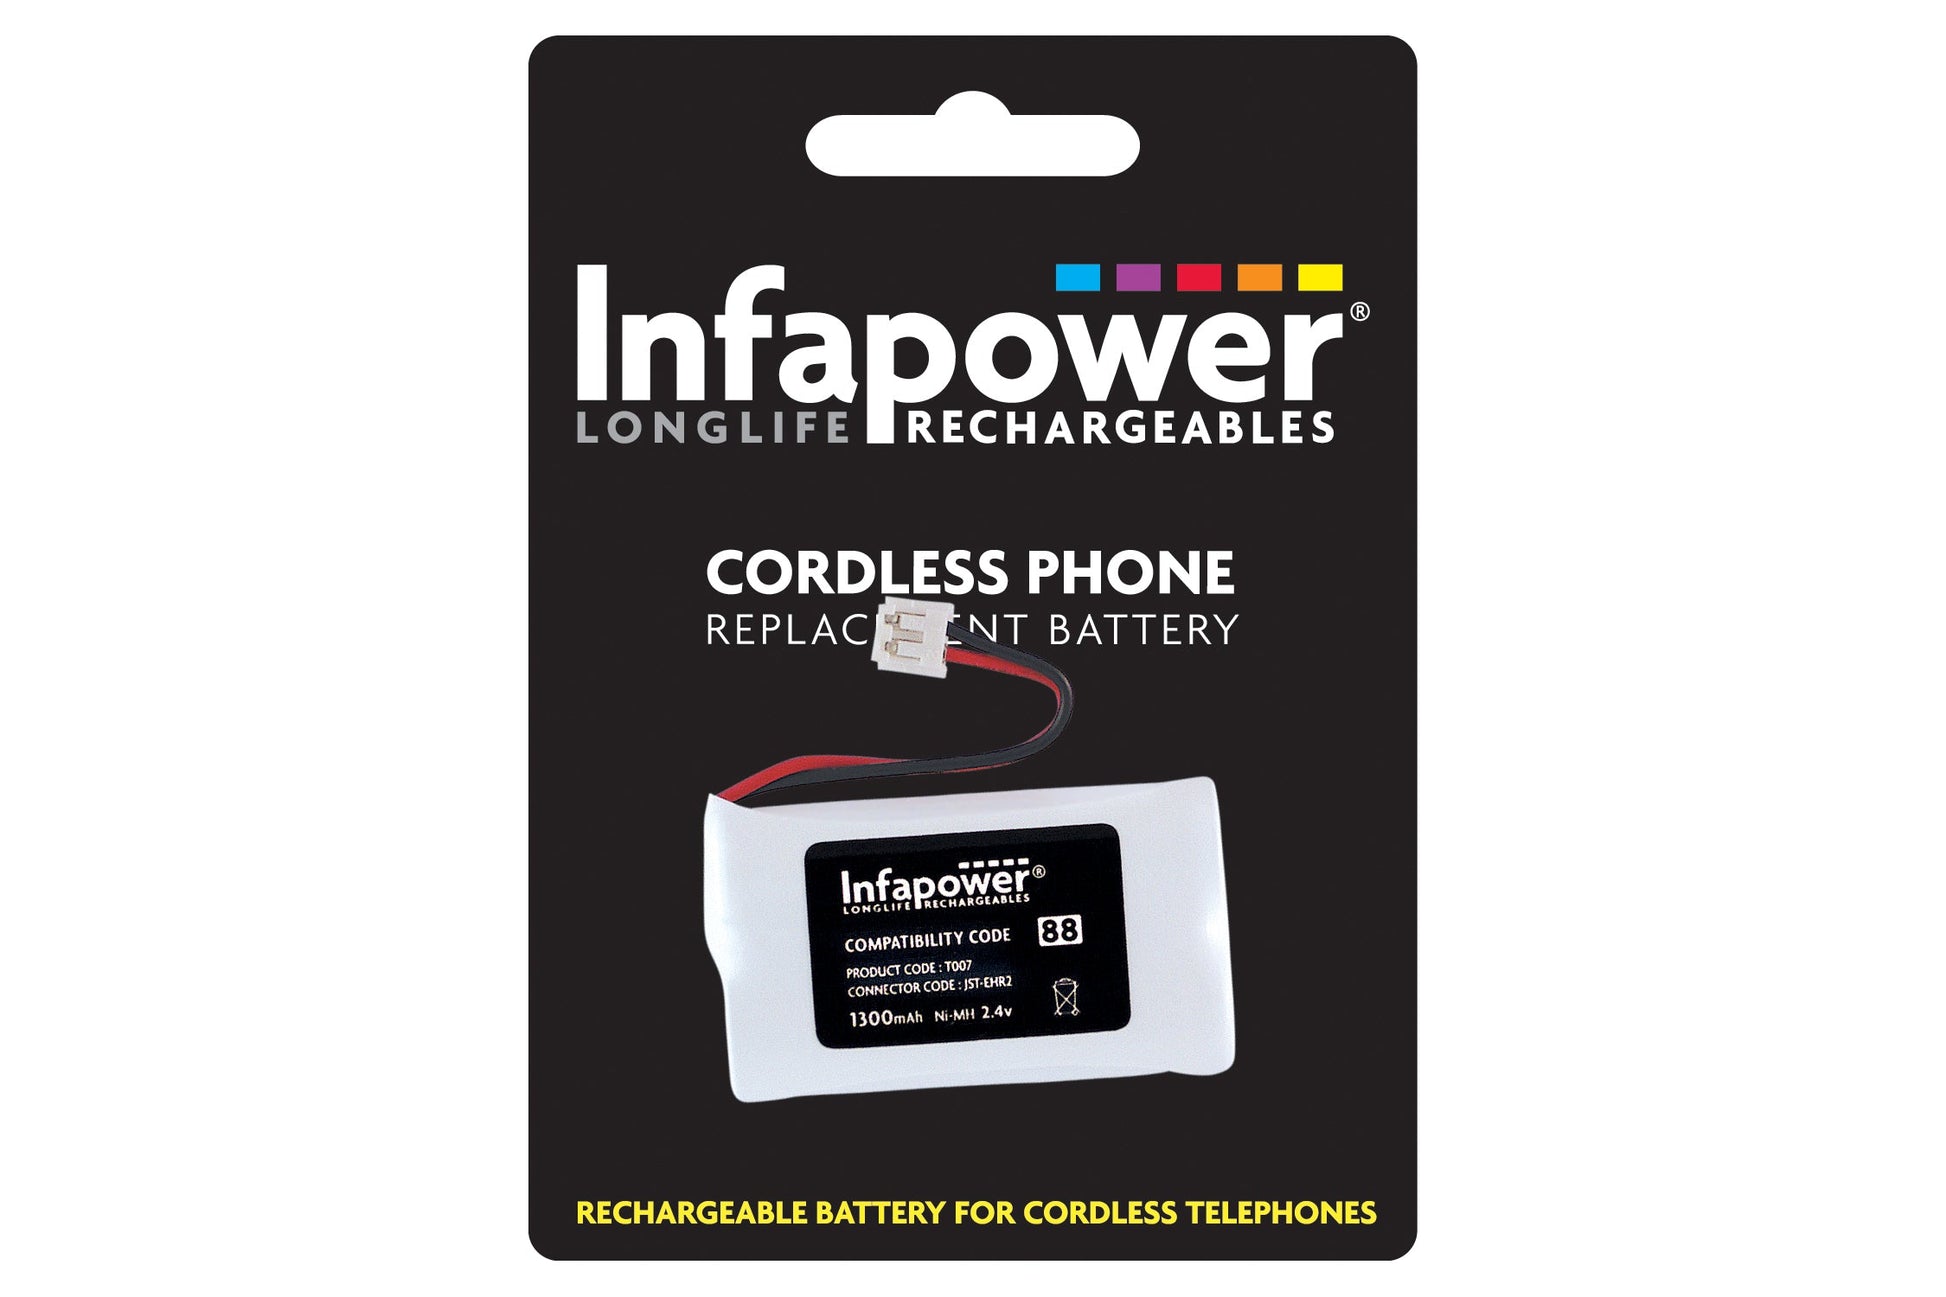 InfaPower Cordless Telephone Rechargeable Ni-MH AA Batteries - Pack of 2 - maplin.co.uk